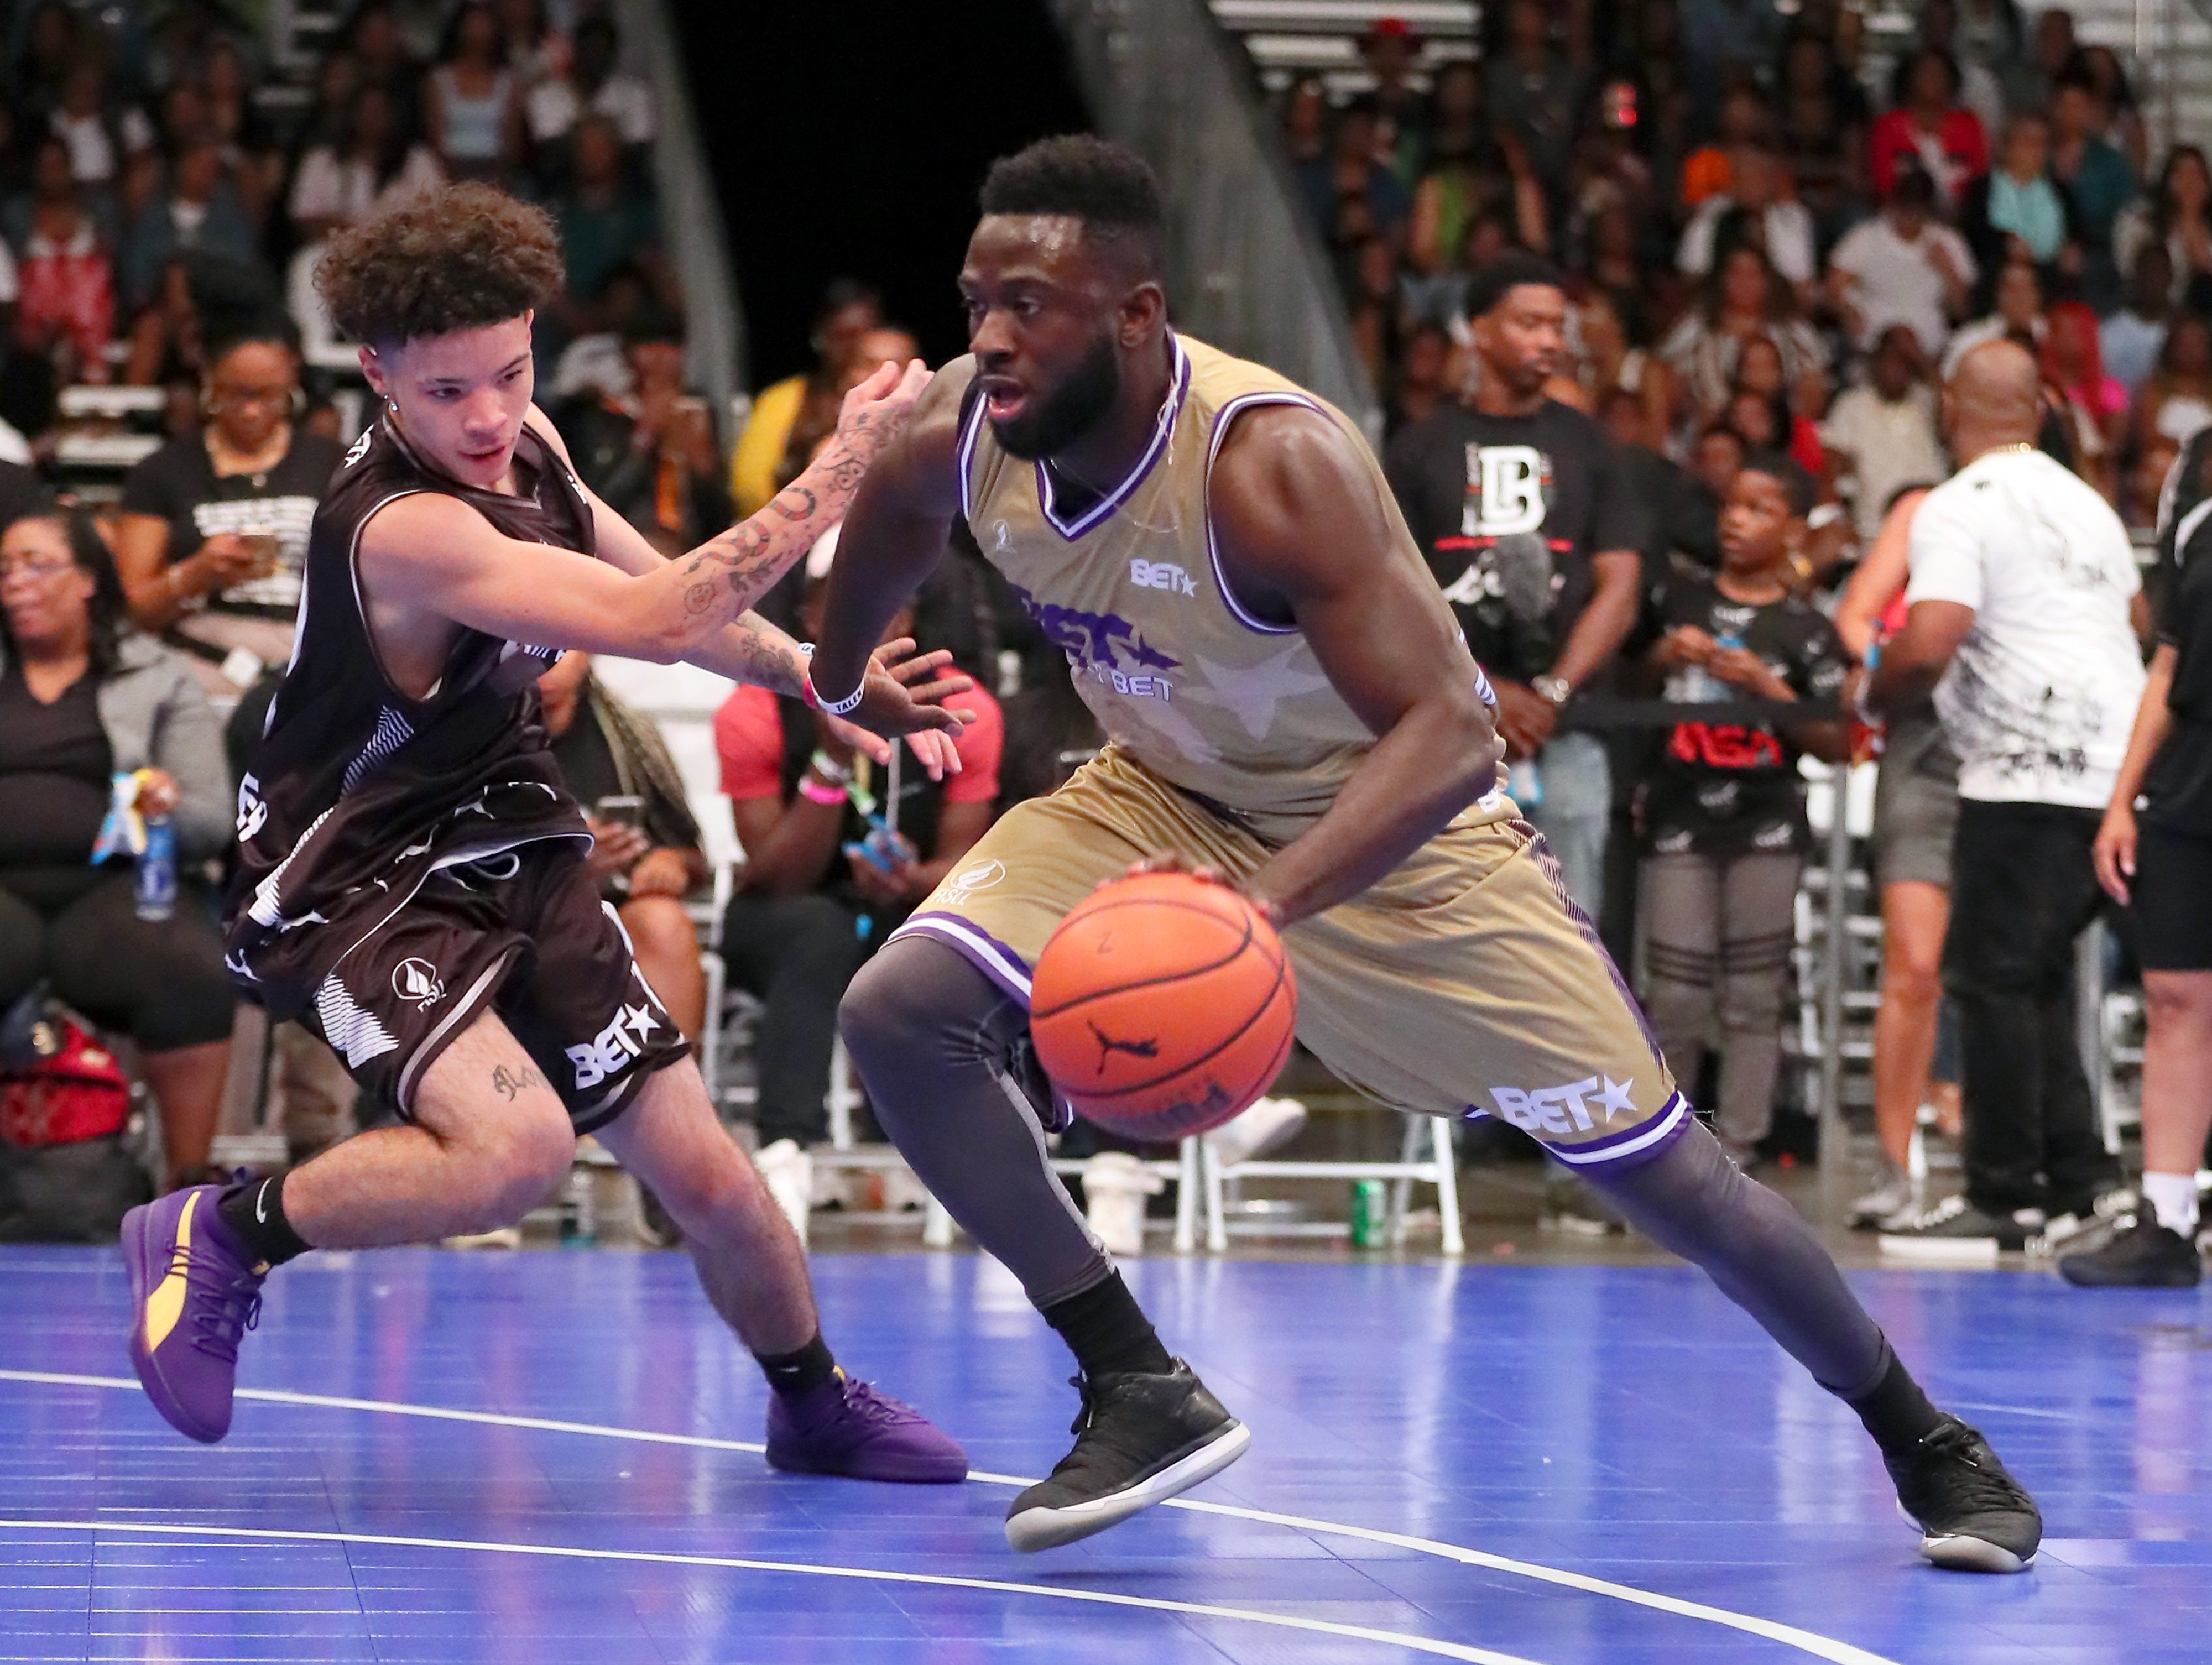 Lil Mosey and Sinqua Walls plays in the BETX Celebrity Basketball Game Sponsored By Sprite during the BET Experience at Los Angeles Convention Center on June 22, 2019 in Los Angeles, California. | Source: Getty Images